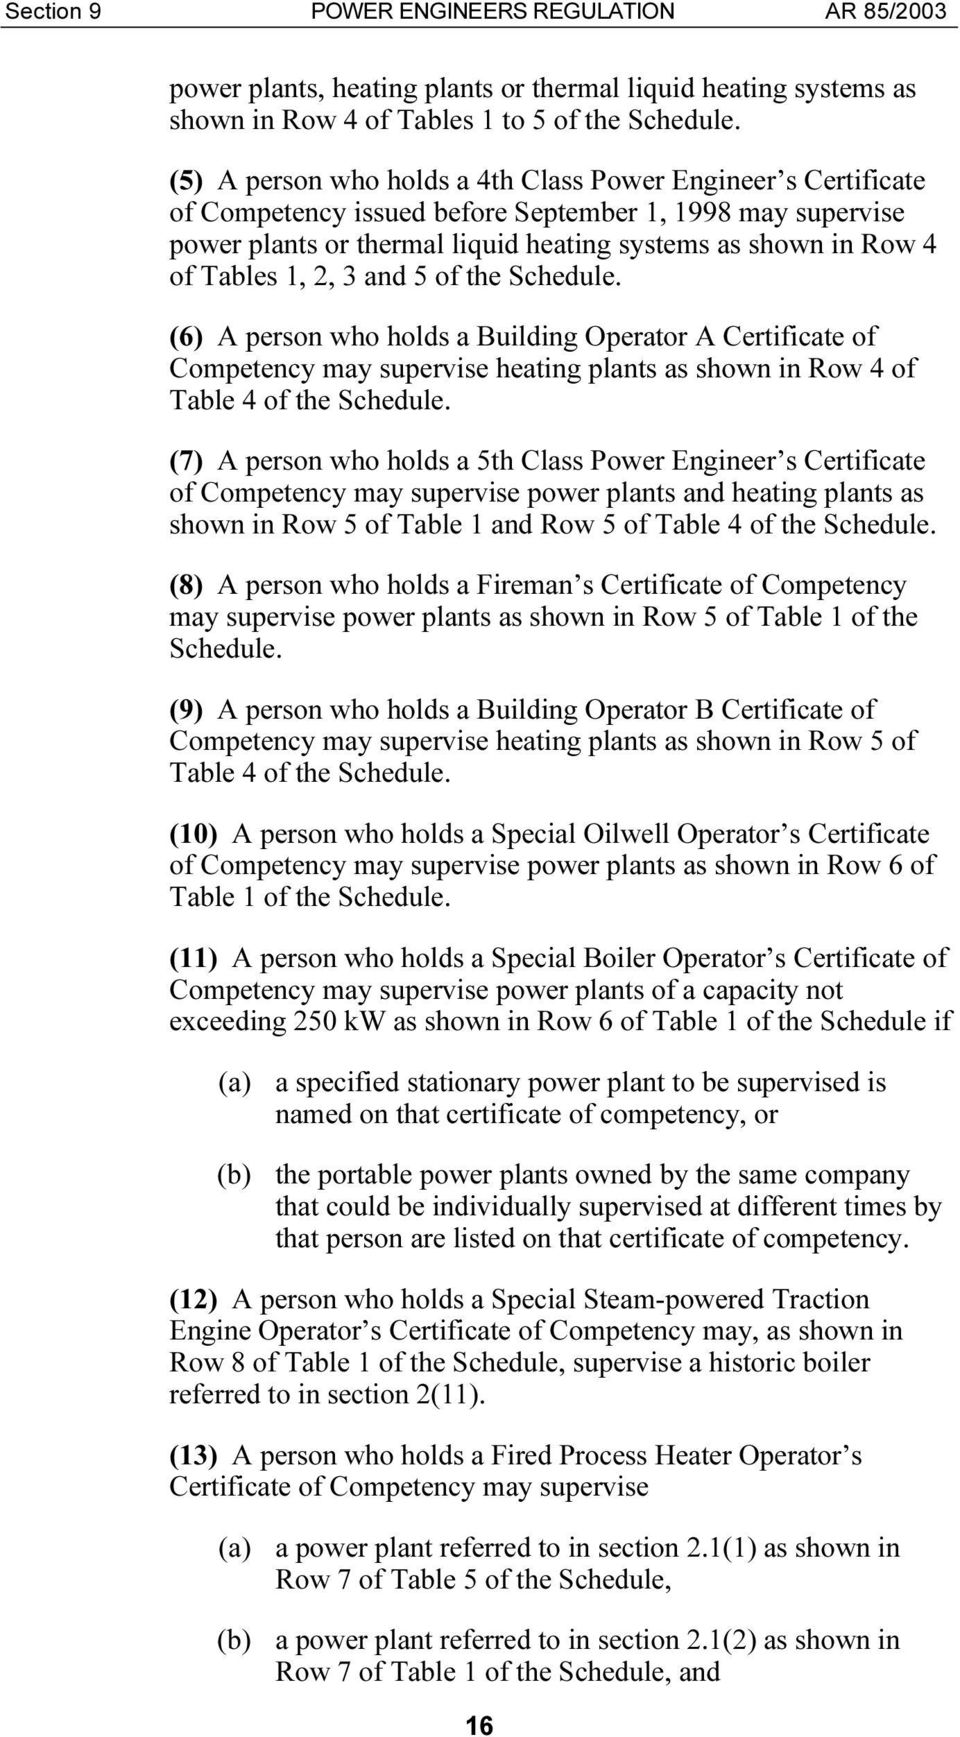 1, 2, 3 and 5 of the Schedule. (6) A person who holds a Building Operator A Certificate of Competency may supervise heating plants as shown in Row 4 of Table 4 of the Schedule.